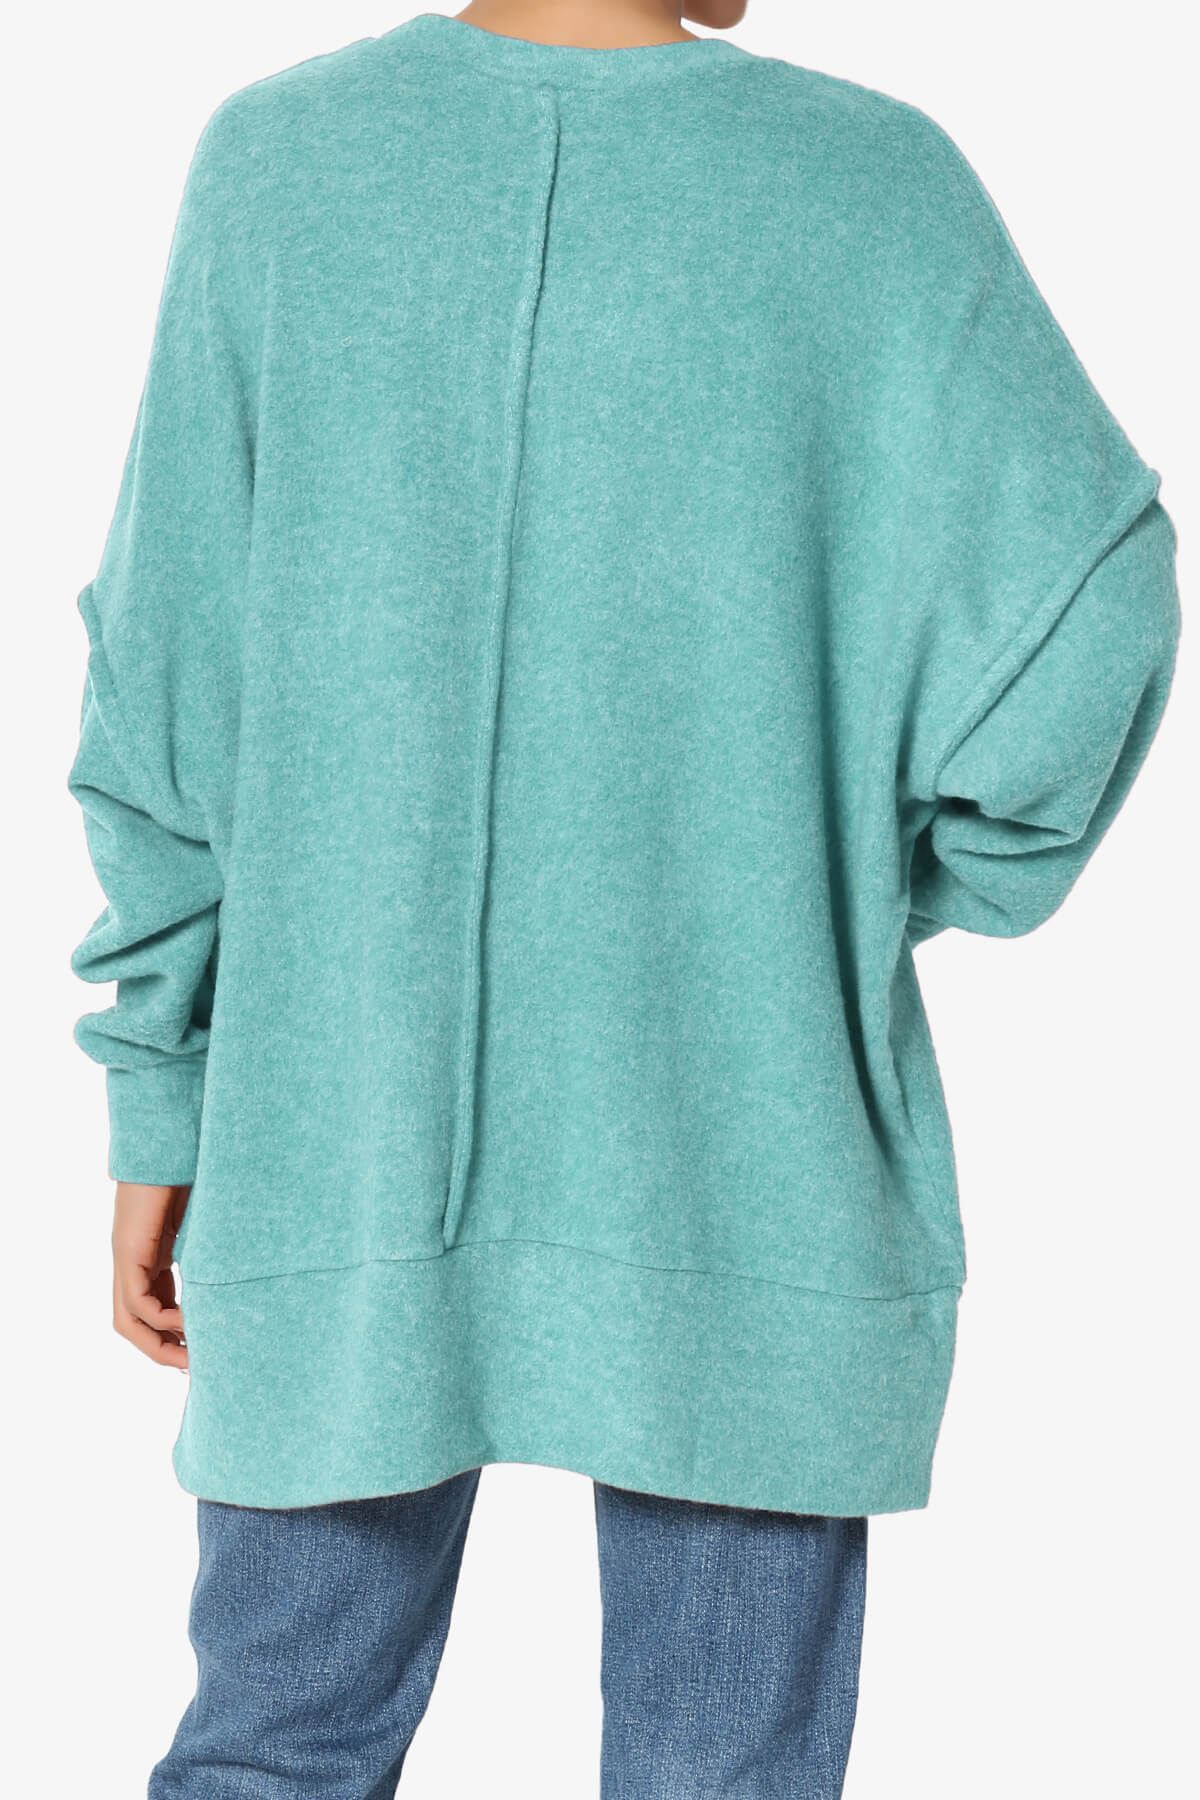 Load image into Gallery viewer, Breccan Blushed Knit Oversized Sweater DUSTY TEAL_2
